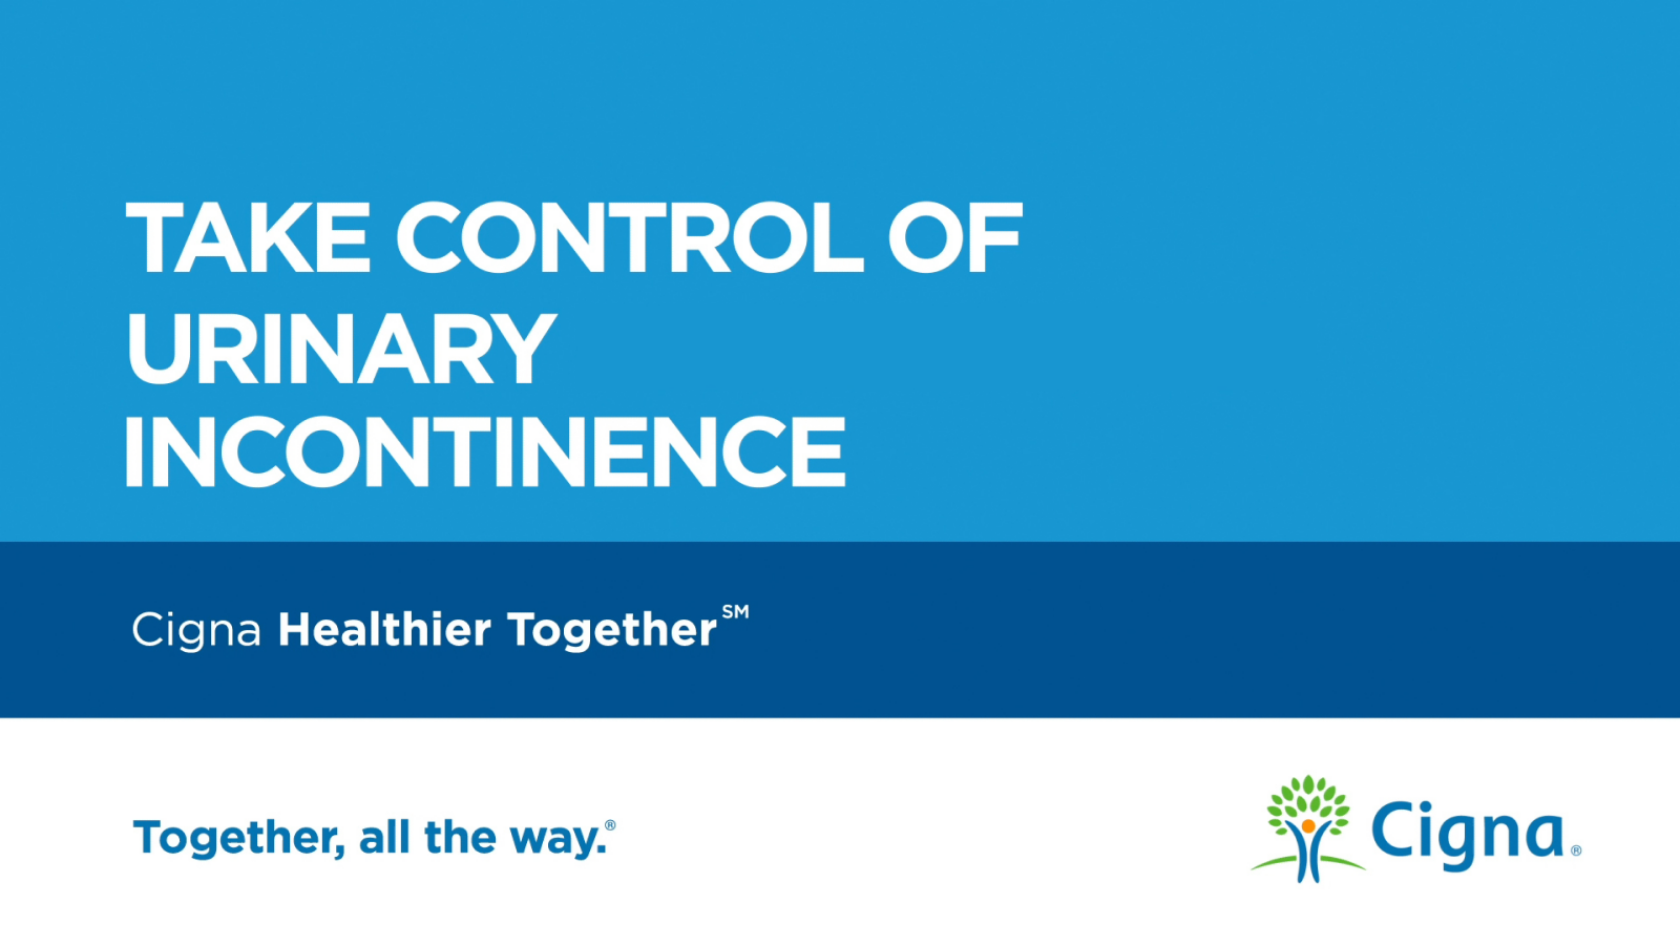 Video: Take Control of Urinary Incontinence